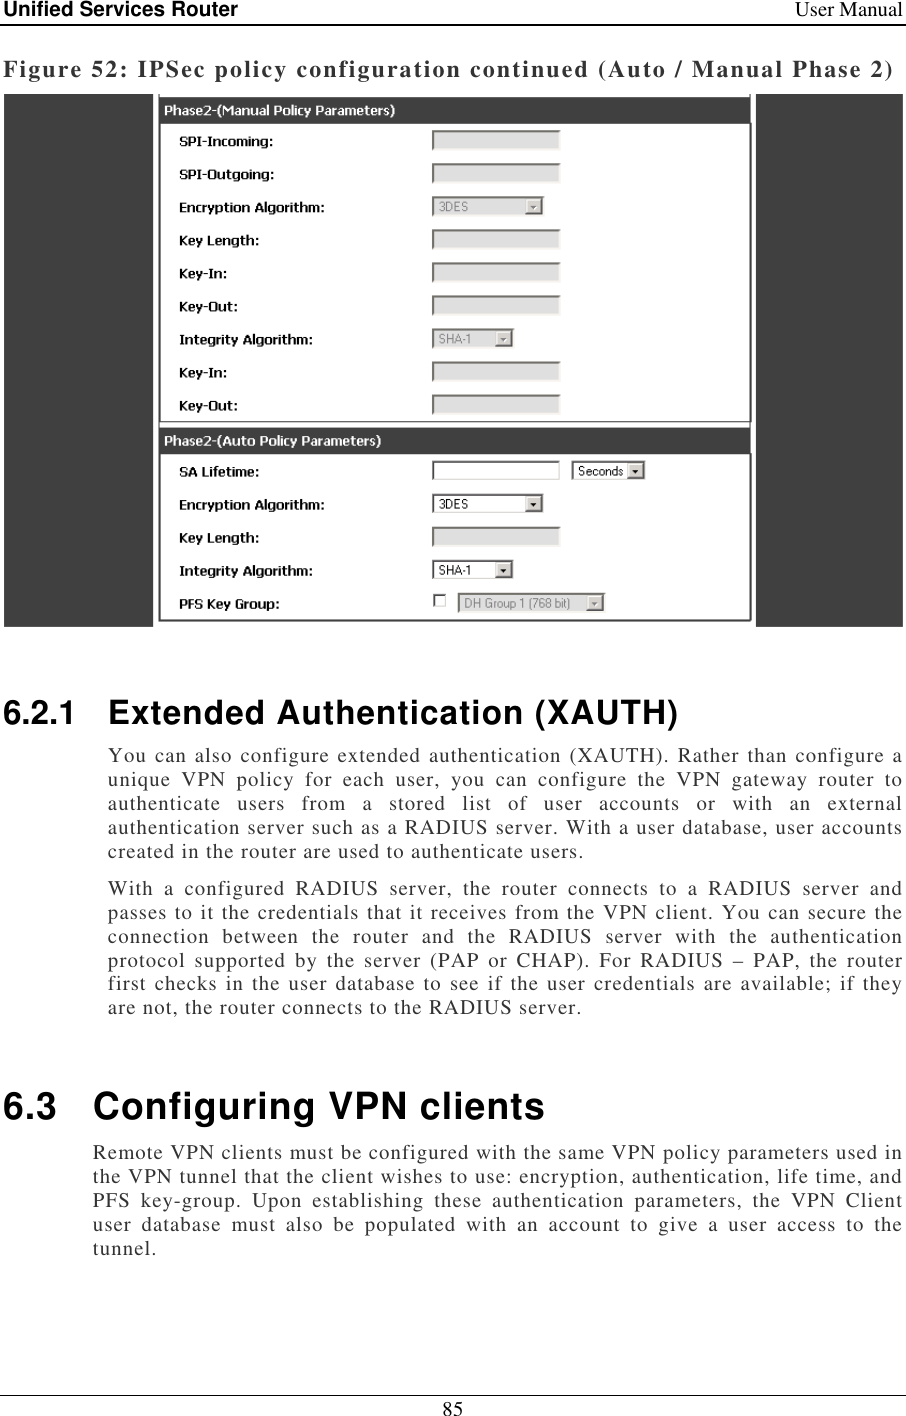 Unified Services Router    User Manual 85  Figure 52: IPSec policy configuration continued (Auto / Manual Phase 2)   6.2.1  Extended Authentication (XAUTH) You can also configure extended authentication (XAUTH). Rather than configure a unique  VPN  policy  for  each  user,  you  can  configure  the  VPN  gateway  router  to authenticate  users  from  a  stored  list  of  user  accounts  or  with  an  external authentication server such as a RADIUS server. With a user database, user accounts created in the router are used to authenticate users.  With  a  configured  RADIUS  server,  the  router  connects  to  a  RADIUS  server  and passes to it the credentials that it receives from the VPN client. You can secure the connection  between  the  router  and  the  RADIUS  server  with  the  authentication protocol  supported  by  the  server  (PAP  or  CHAP).  For  RADIUS  –  PAP,  the  router first  checks in the user database to see if the user credentials  are available;  if  they are not, the router connects to the RADIUS server.   6.3  Configuring VPN clients Remote VPN clients must be configured with the same VPN policy parameters used in the VPN tunnel that the client wishes to use: encryption, authentication, life time, and PFS  key-group.  Upon  establishing  these  authentication  parameters,  the  VPN  Client user  database  must  also  be  populated  with  an  account  to  give  a  user  access  to  the tunnel.  